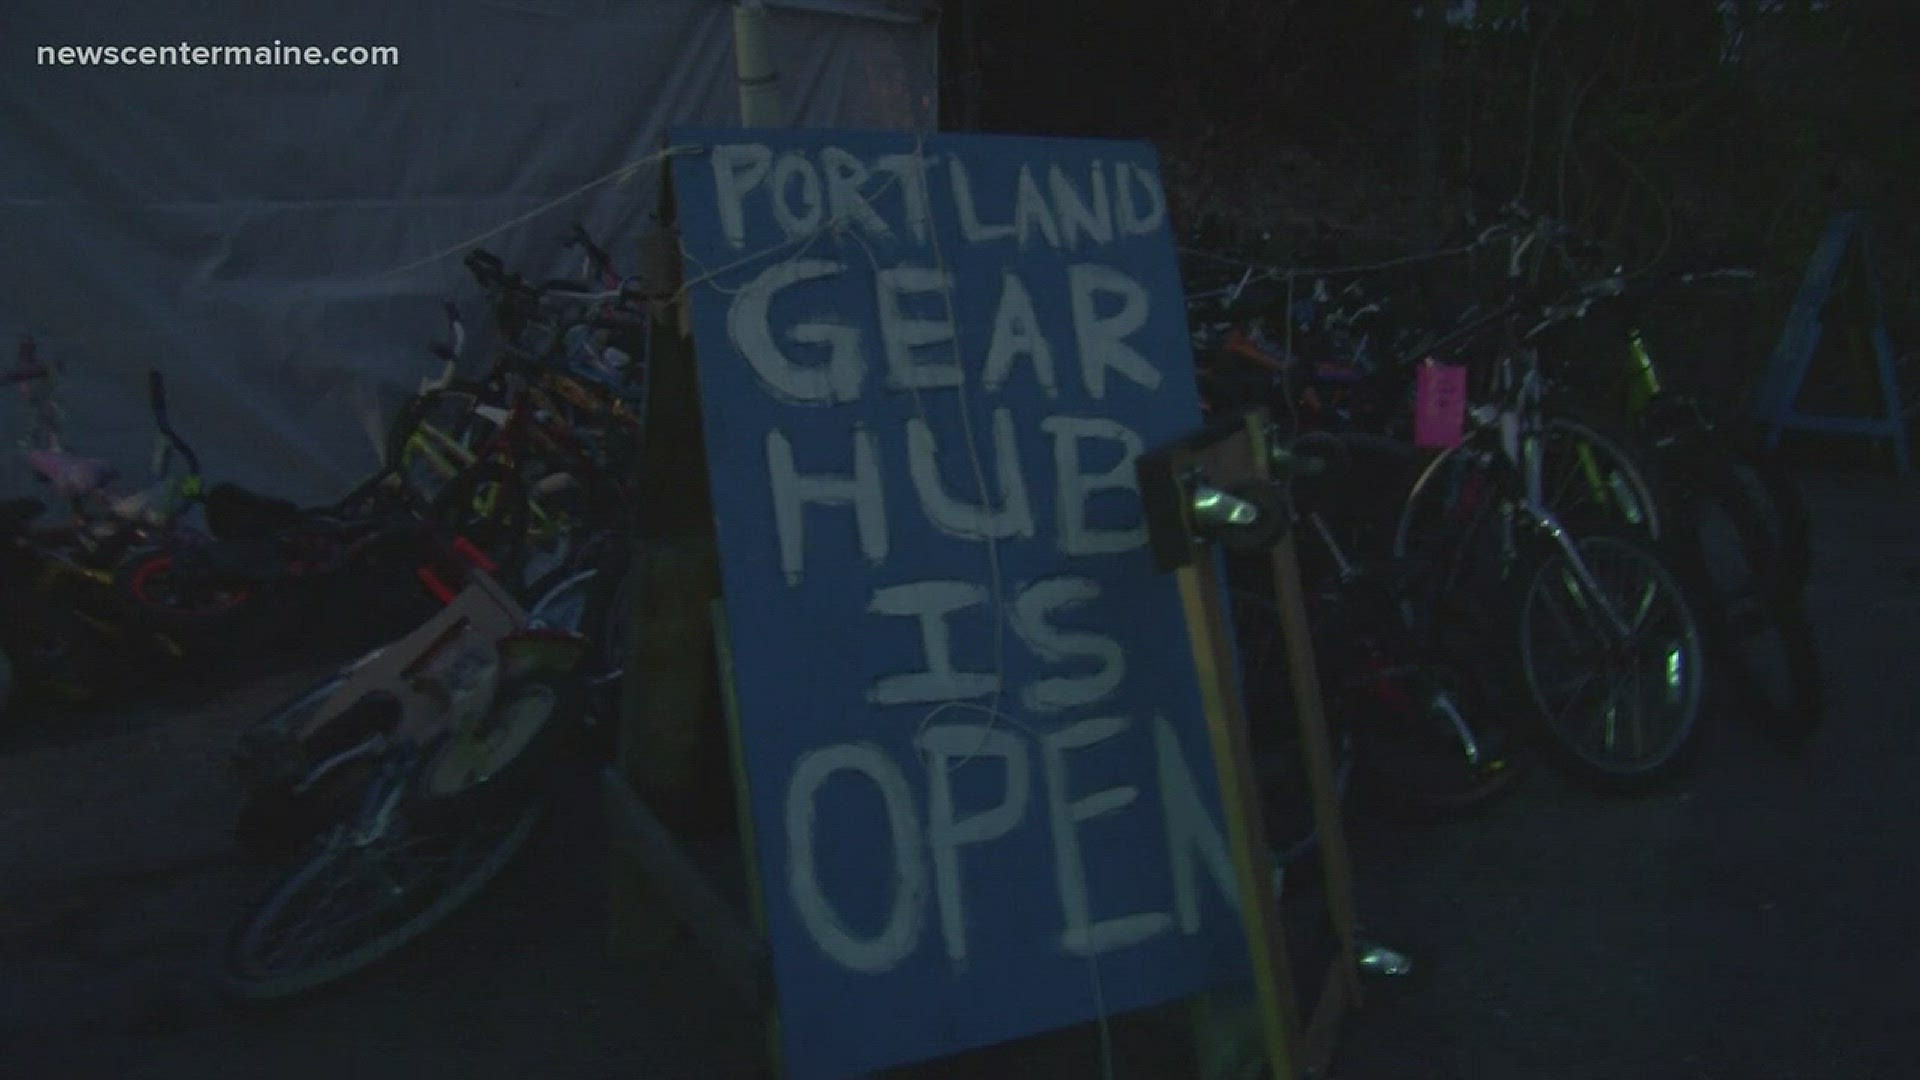 Portland Gear Hub gives free bikes to those who take safety classes.